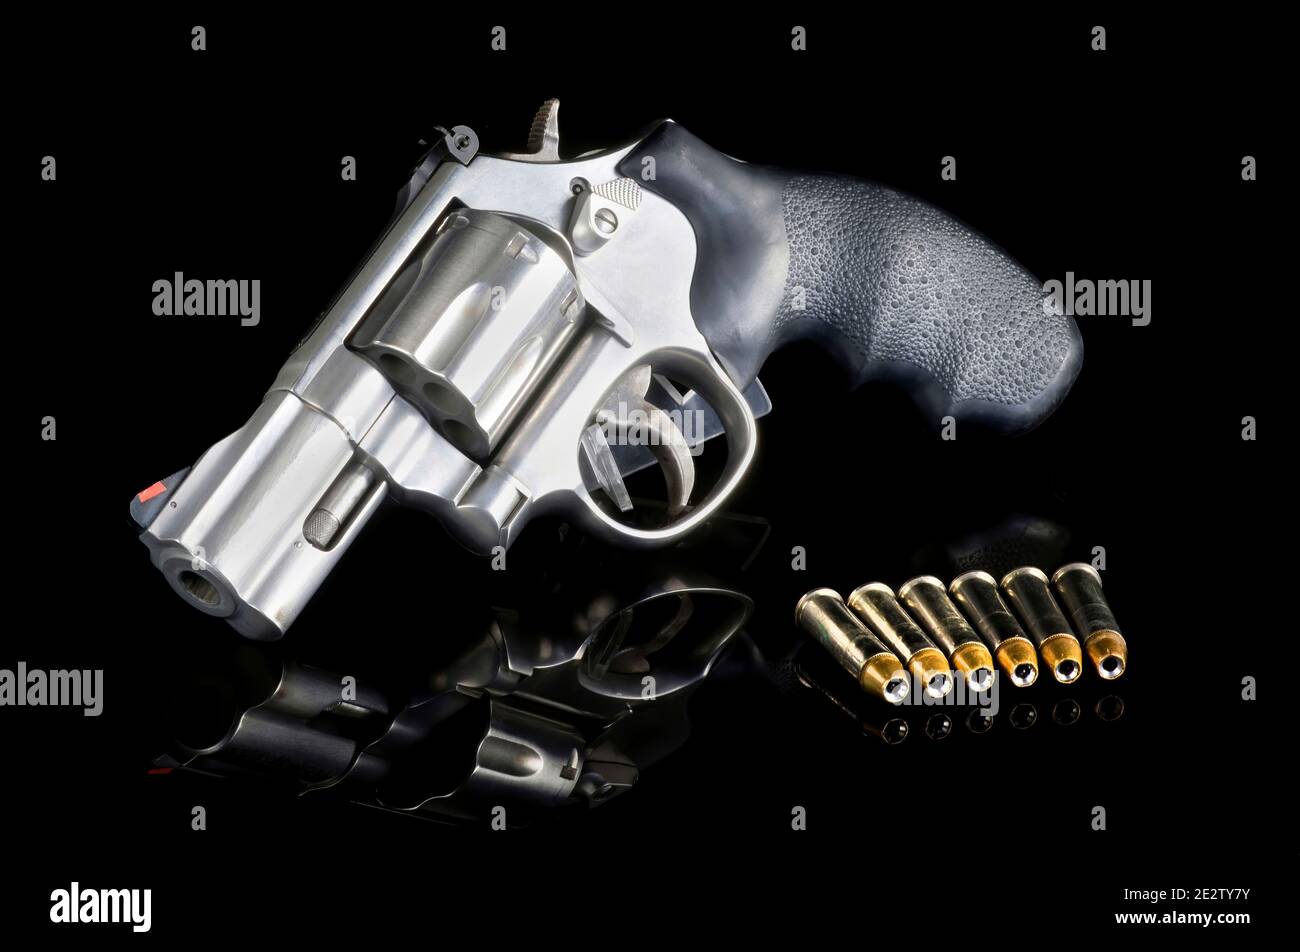 Modern six shooter that is a 357 magnum revolver. Stock Photo